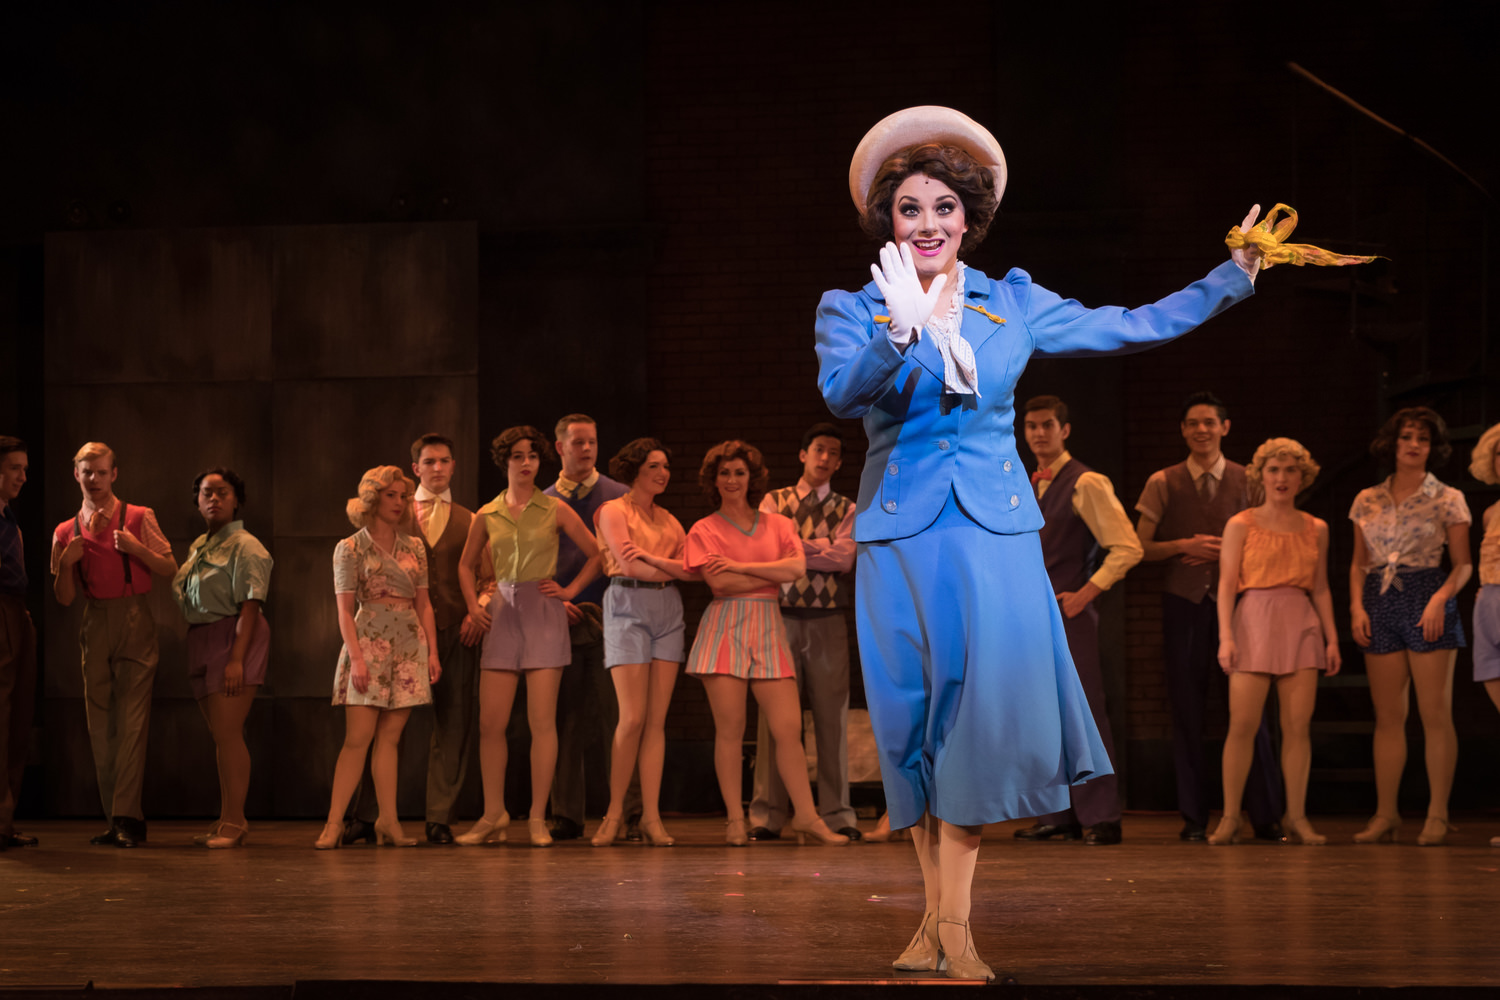 Gia Welch portrays Peggy Sawyer in the Theatre Memphis production of 42nd Street, through July 1, 2018. Photo by Carla McDonald.